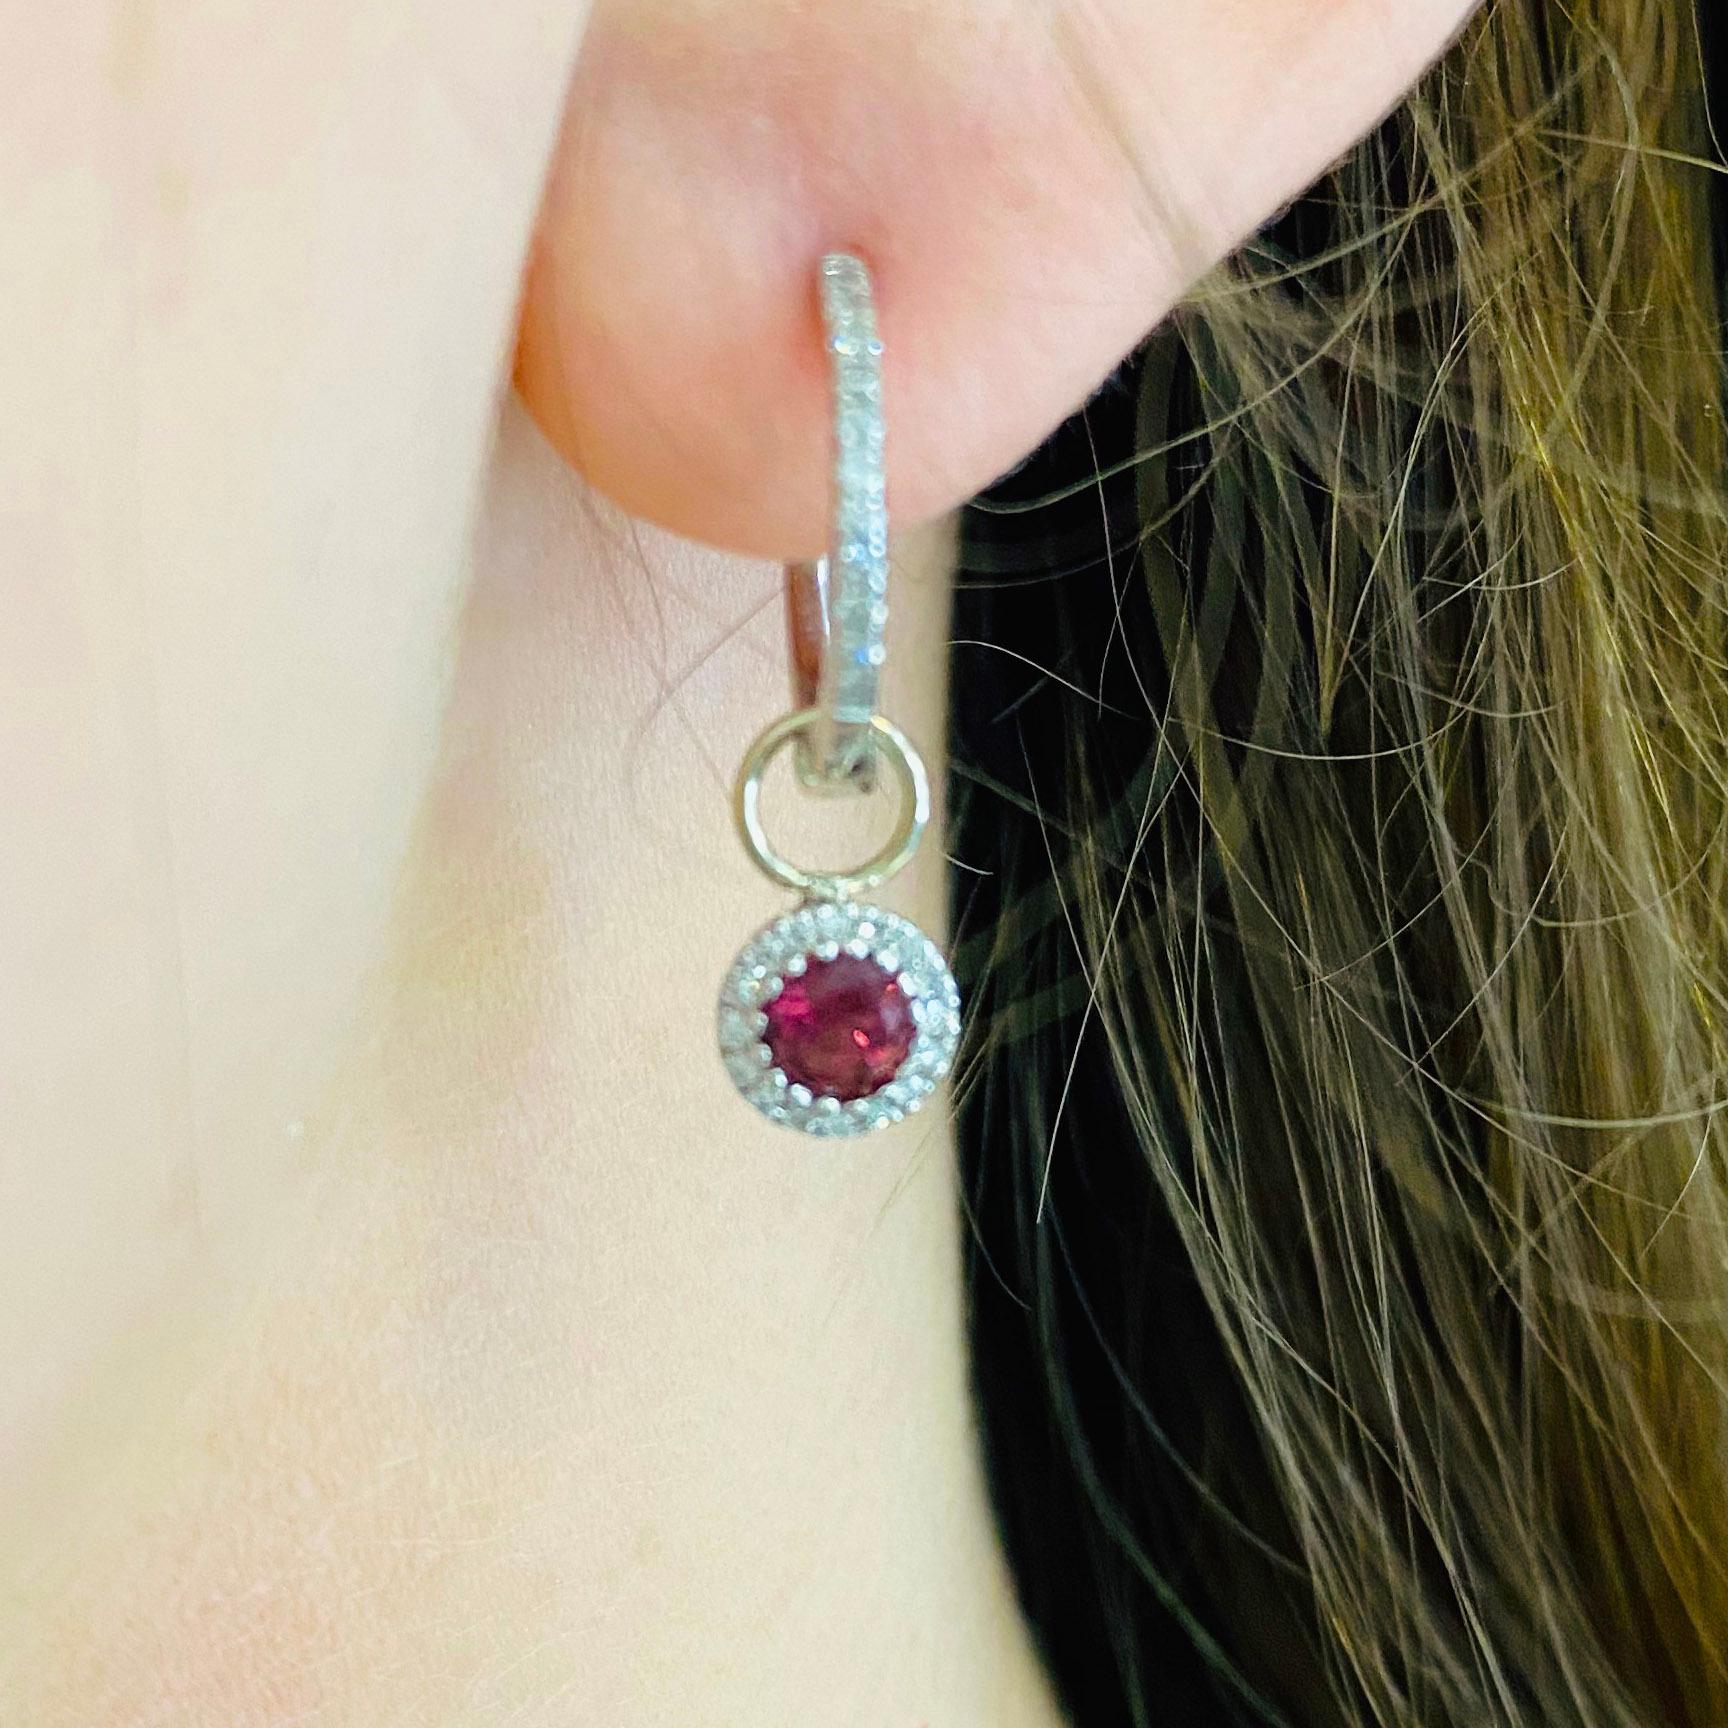 These stunning earring charms are the perfect way to dress up any pair of hoops! With polished 14k white gold surrounding a brilliant round red ruby and dripping with white diamonds, these charms make the perfect chic and modern accessory for any